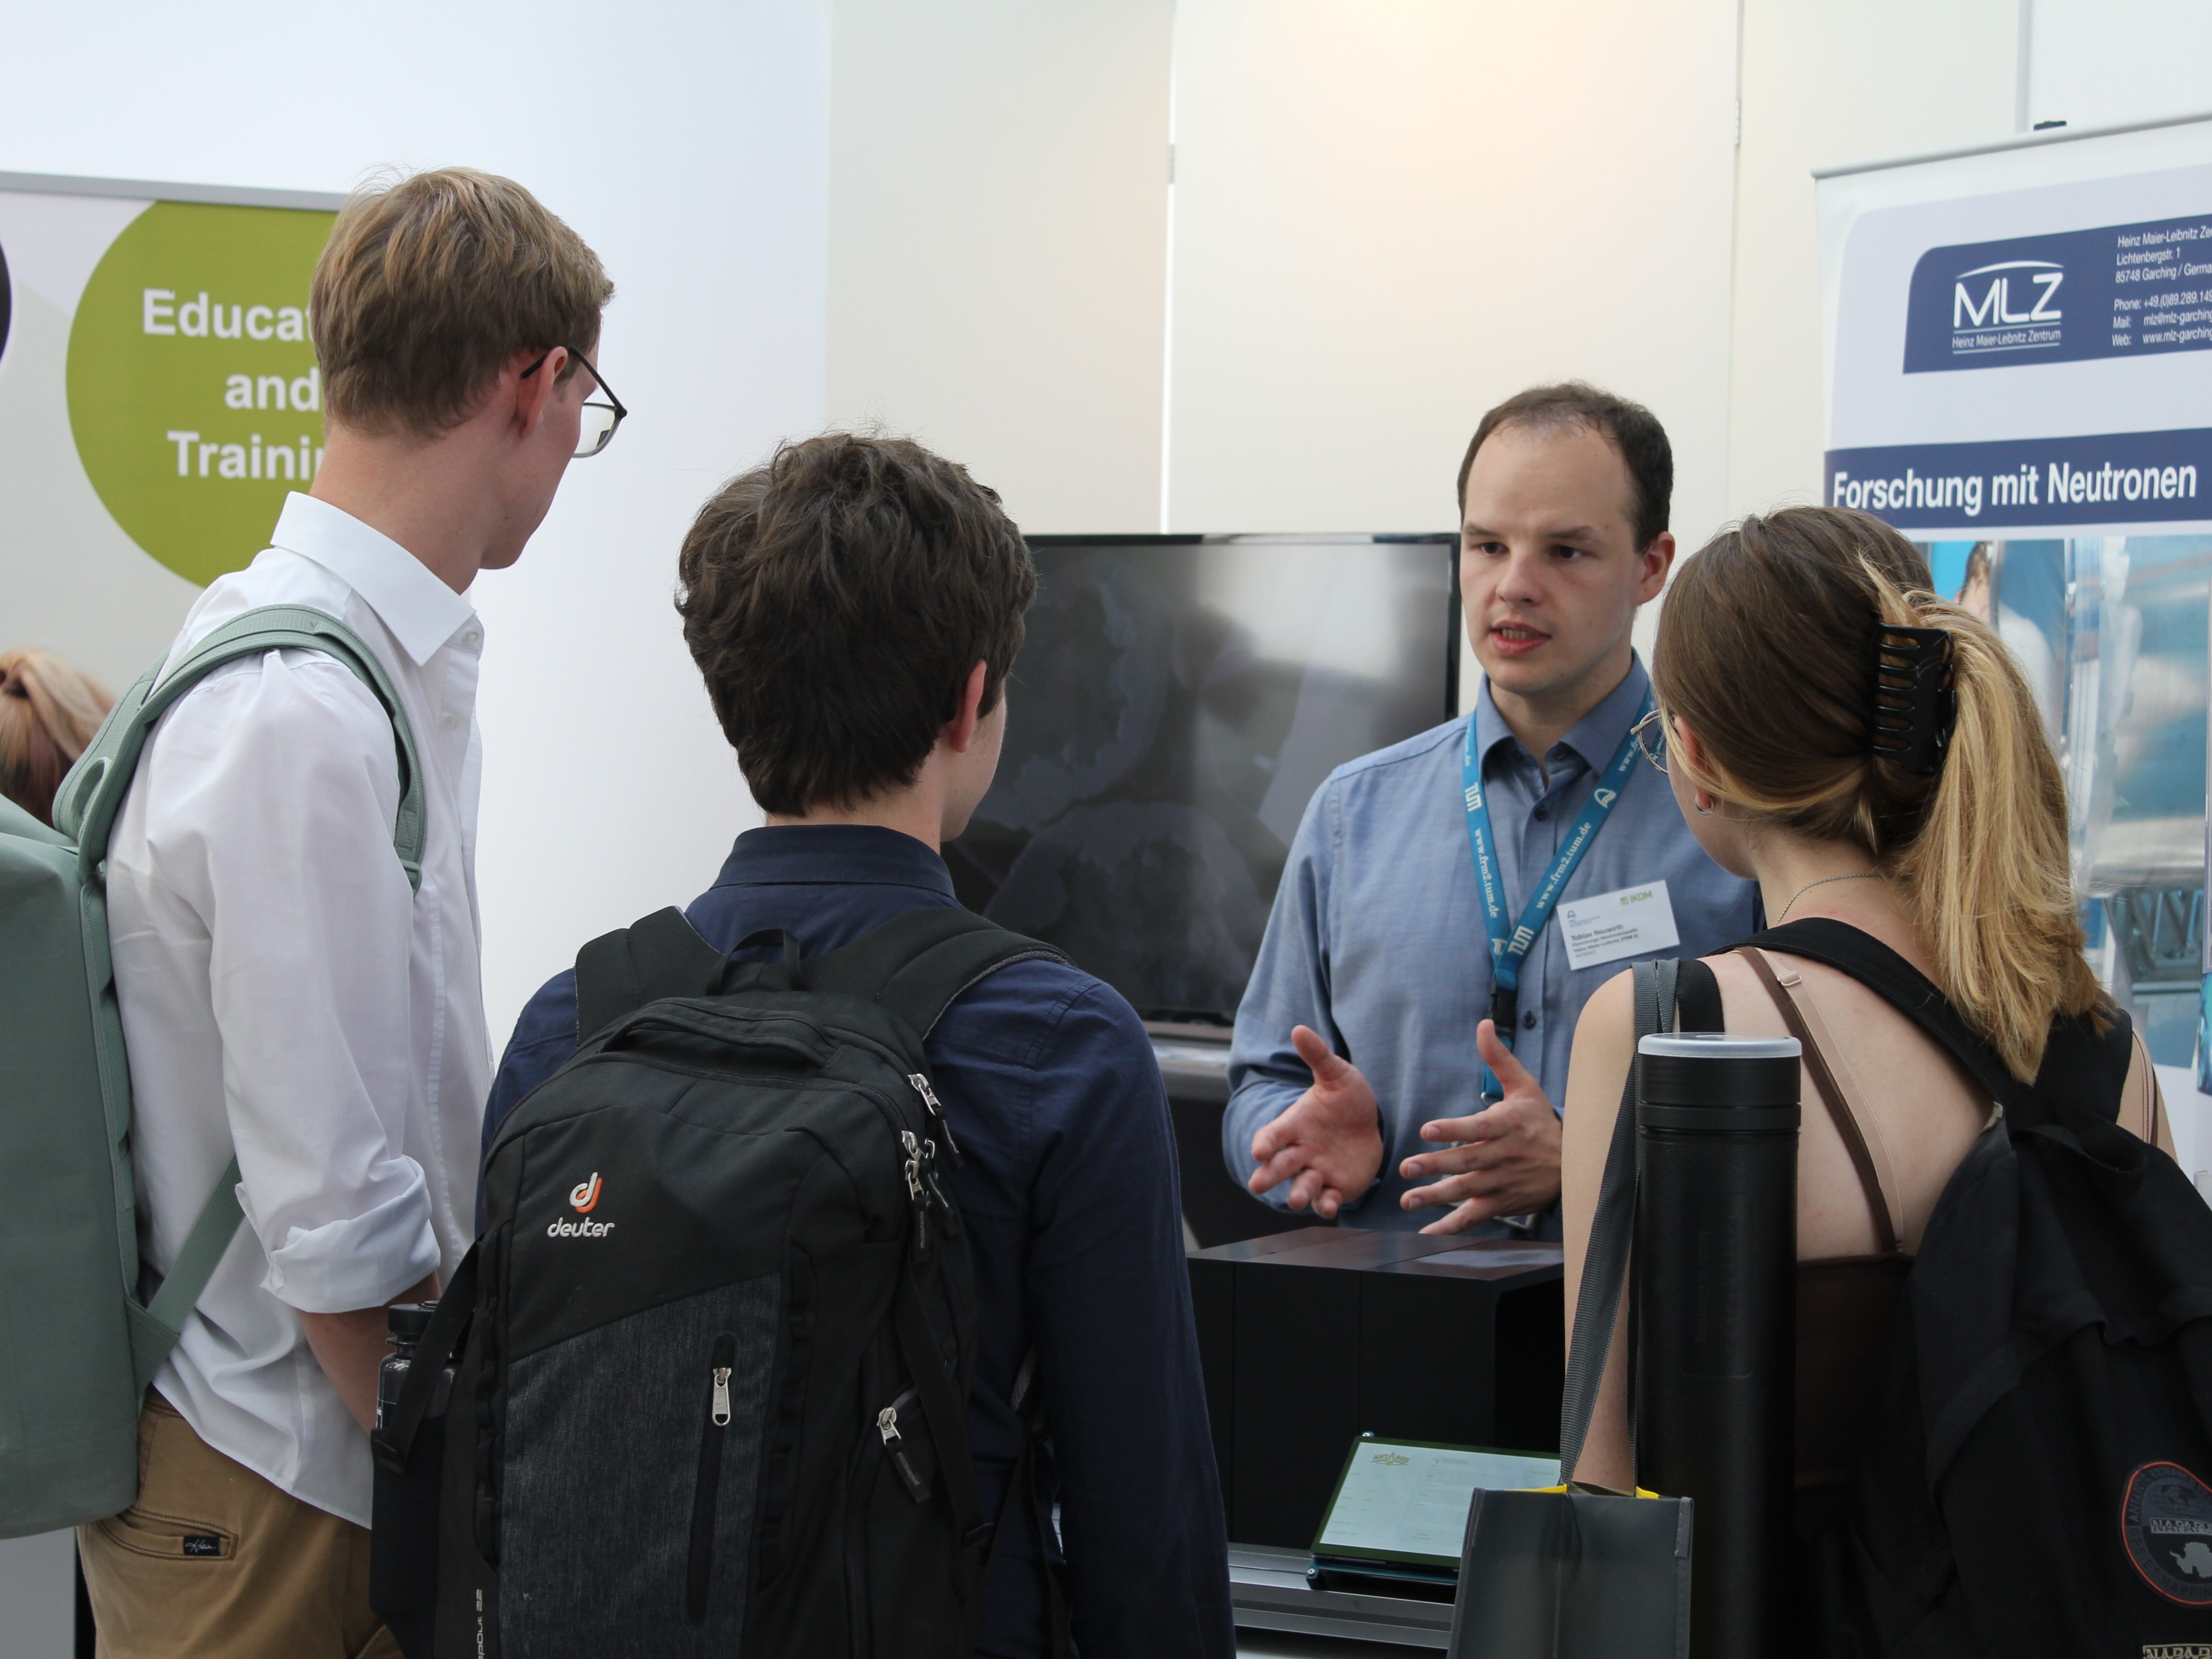 A 3D model and many contacts: The career fair IKOM